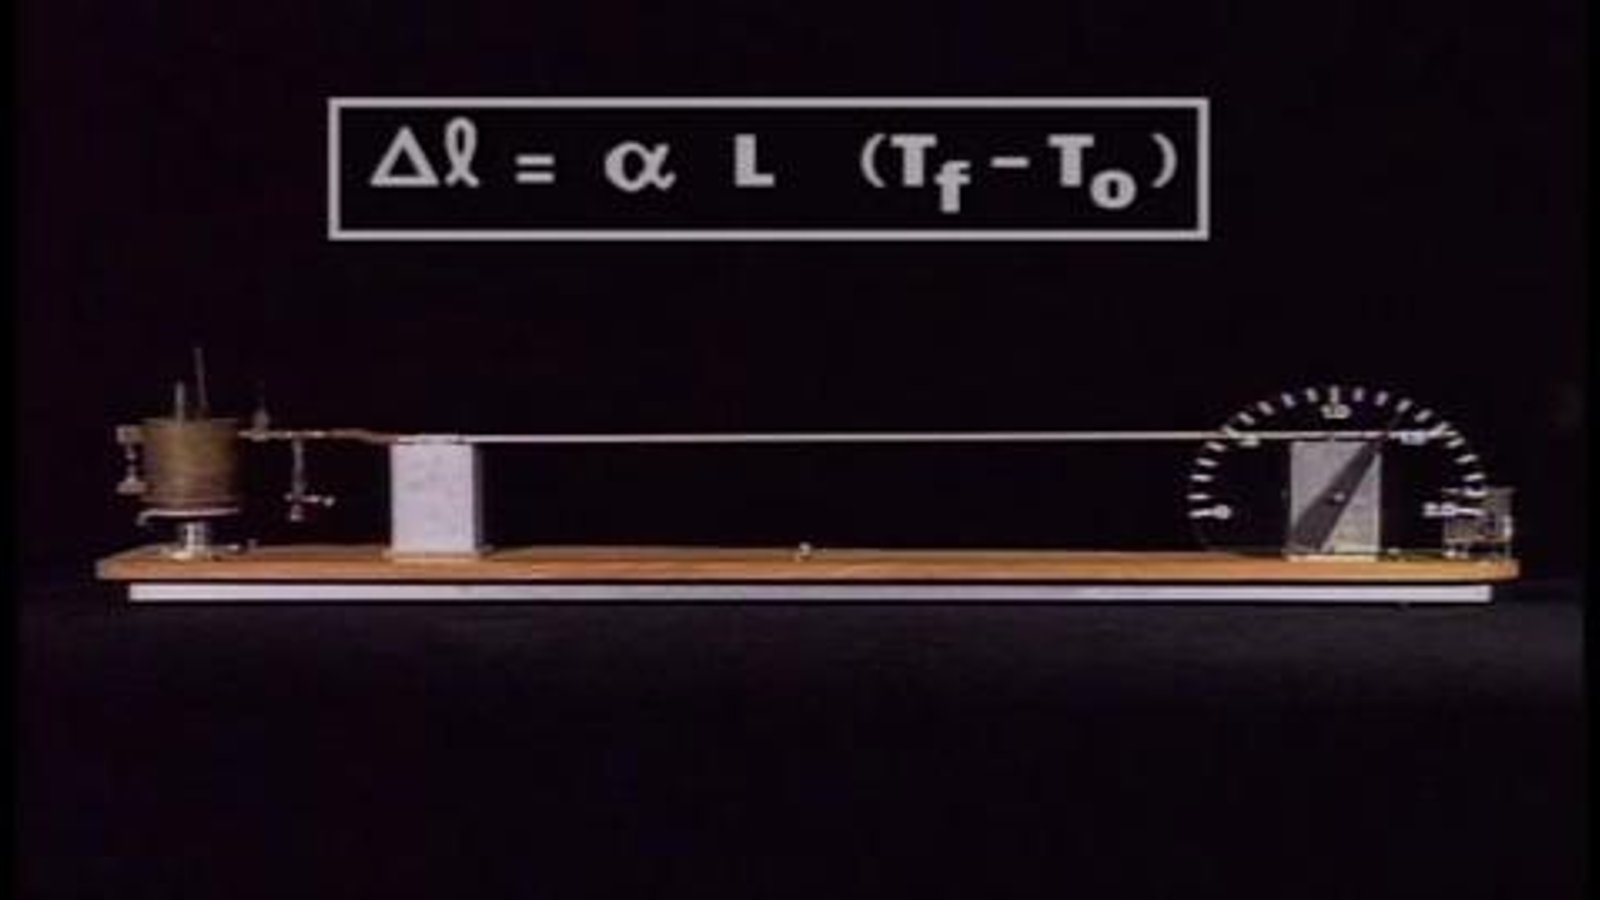 Physics Demonstrations in Heat: Part I